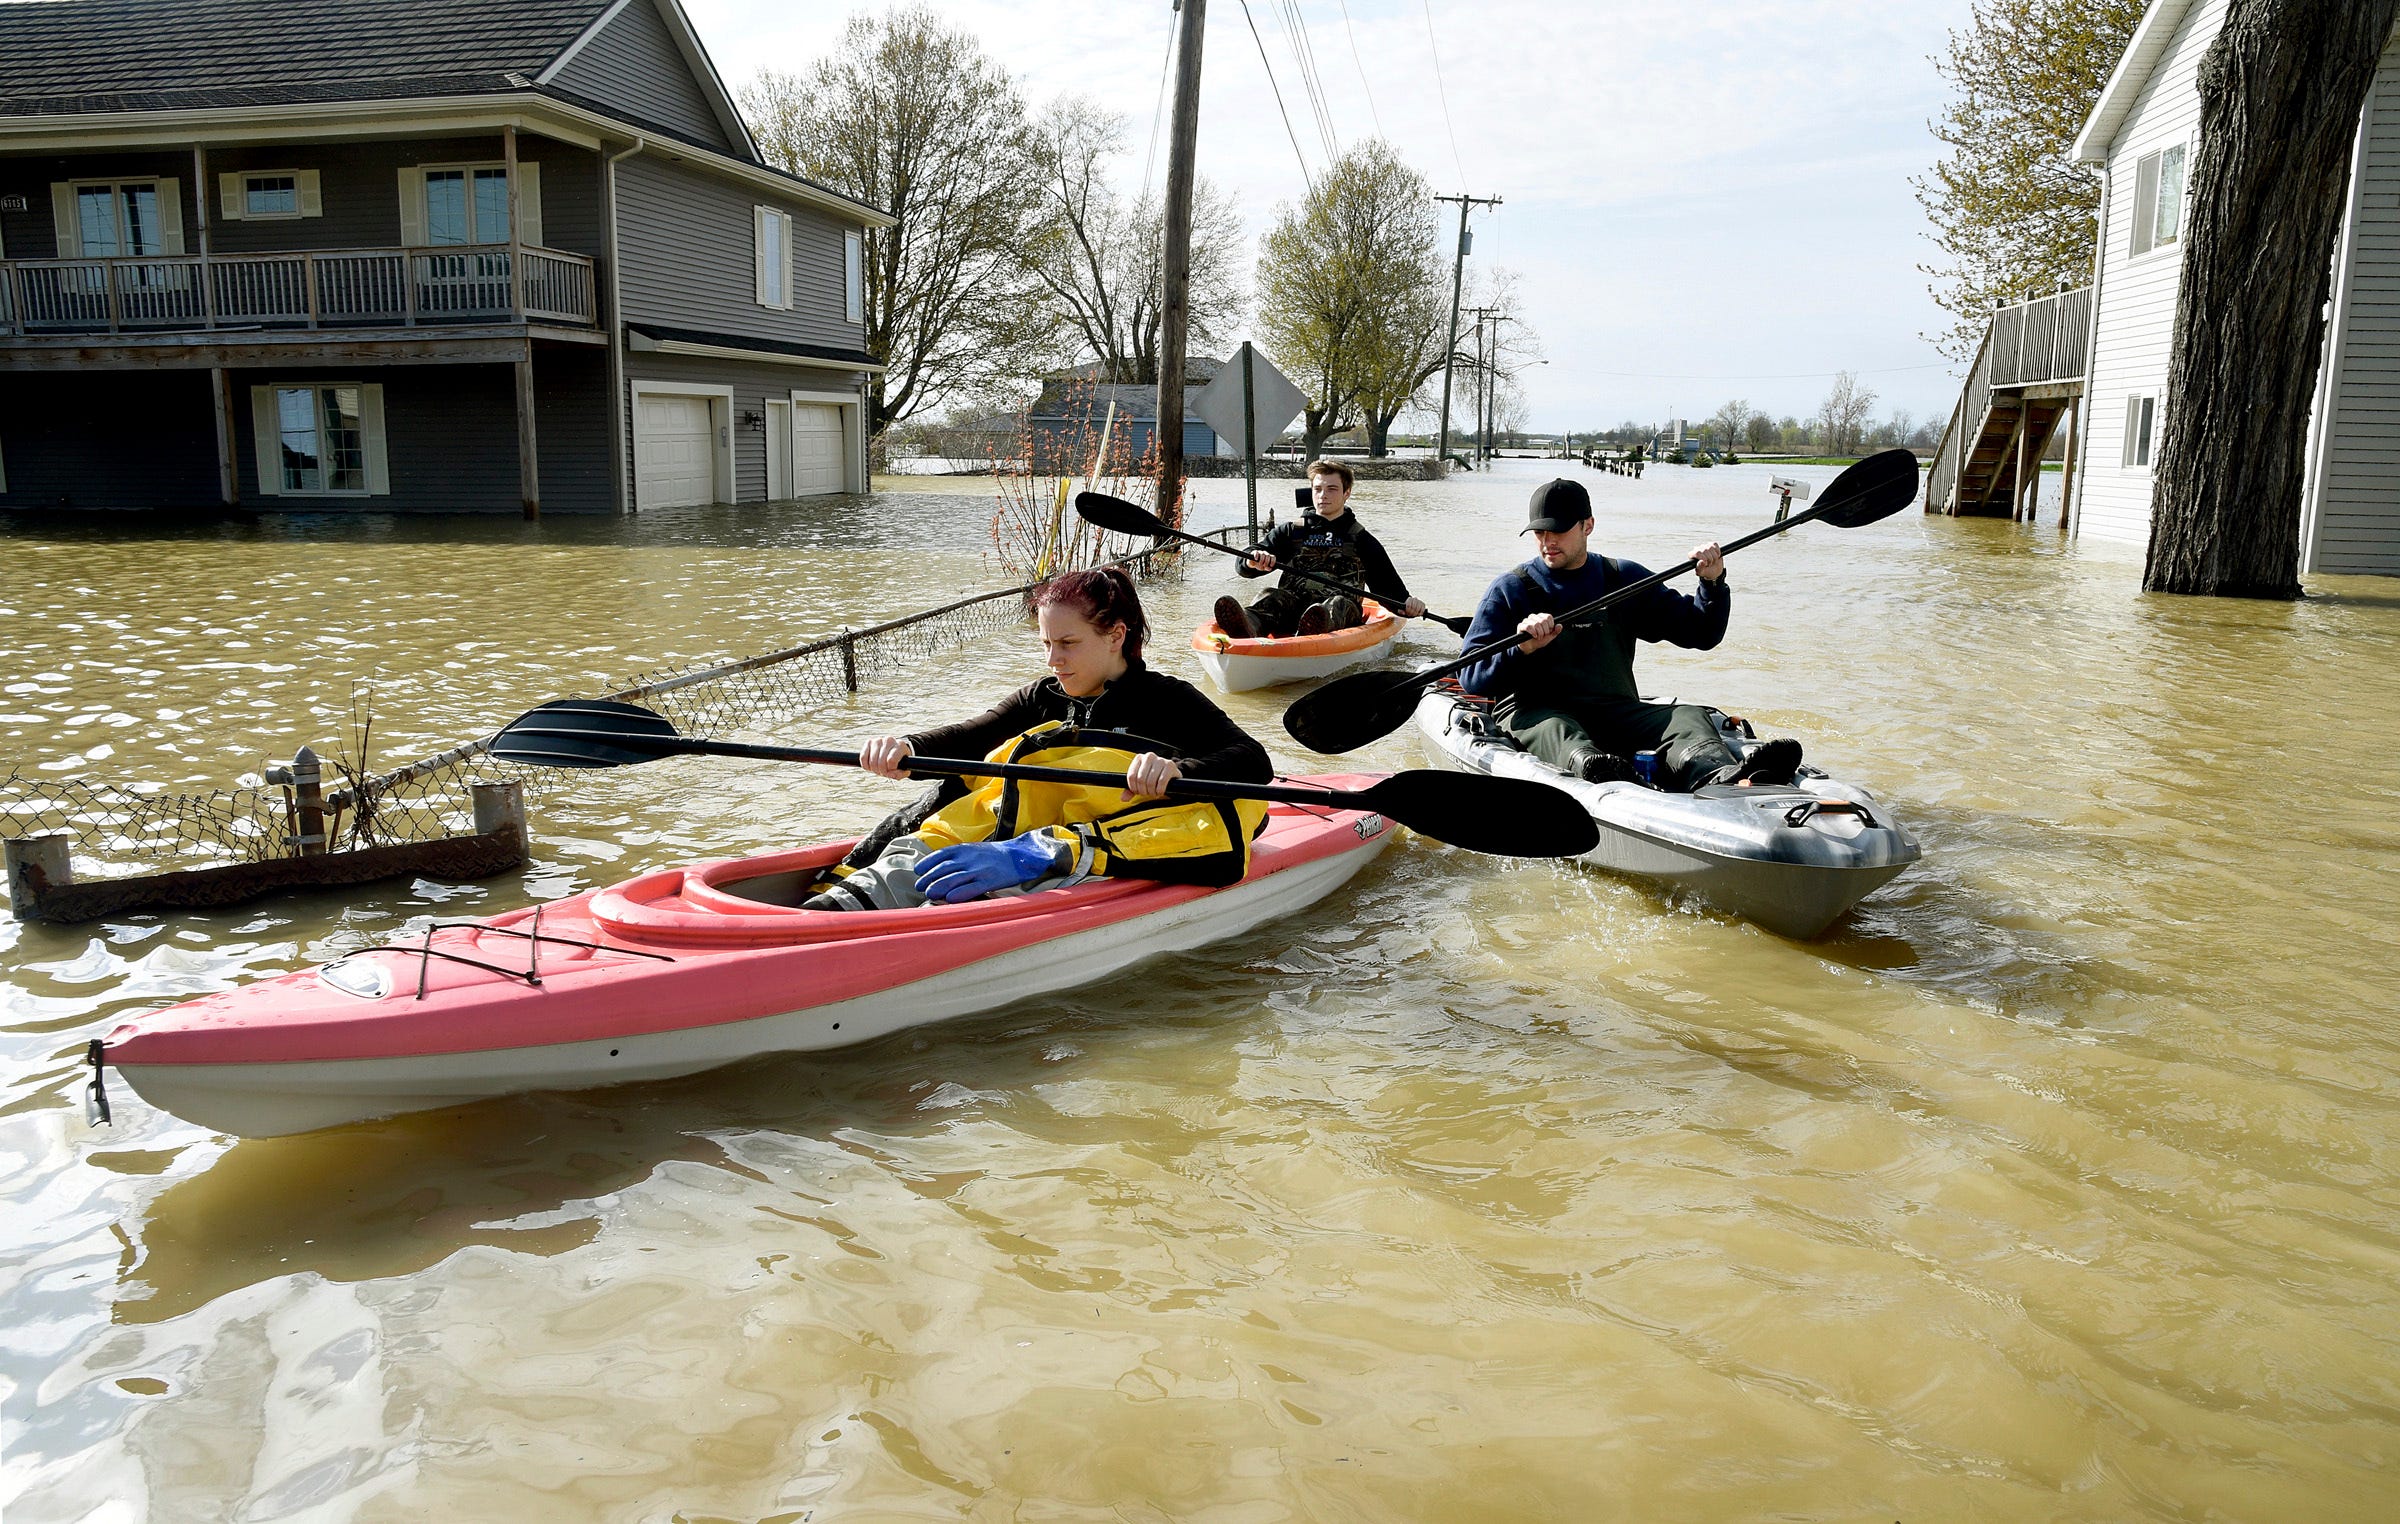 Estral Beach firefighters Courtney Millar, Eric Bruley and Chase Baldwin kayak down Lakeshore Drive in the south end of Estral Beach in Berlin Township last month.